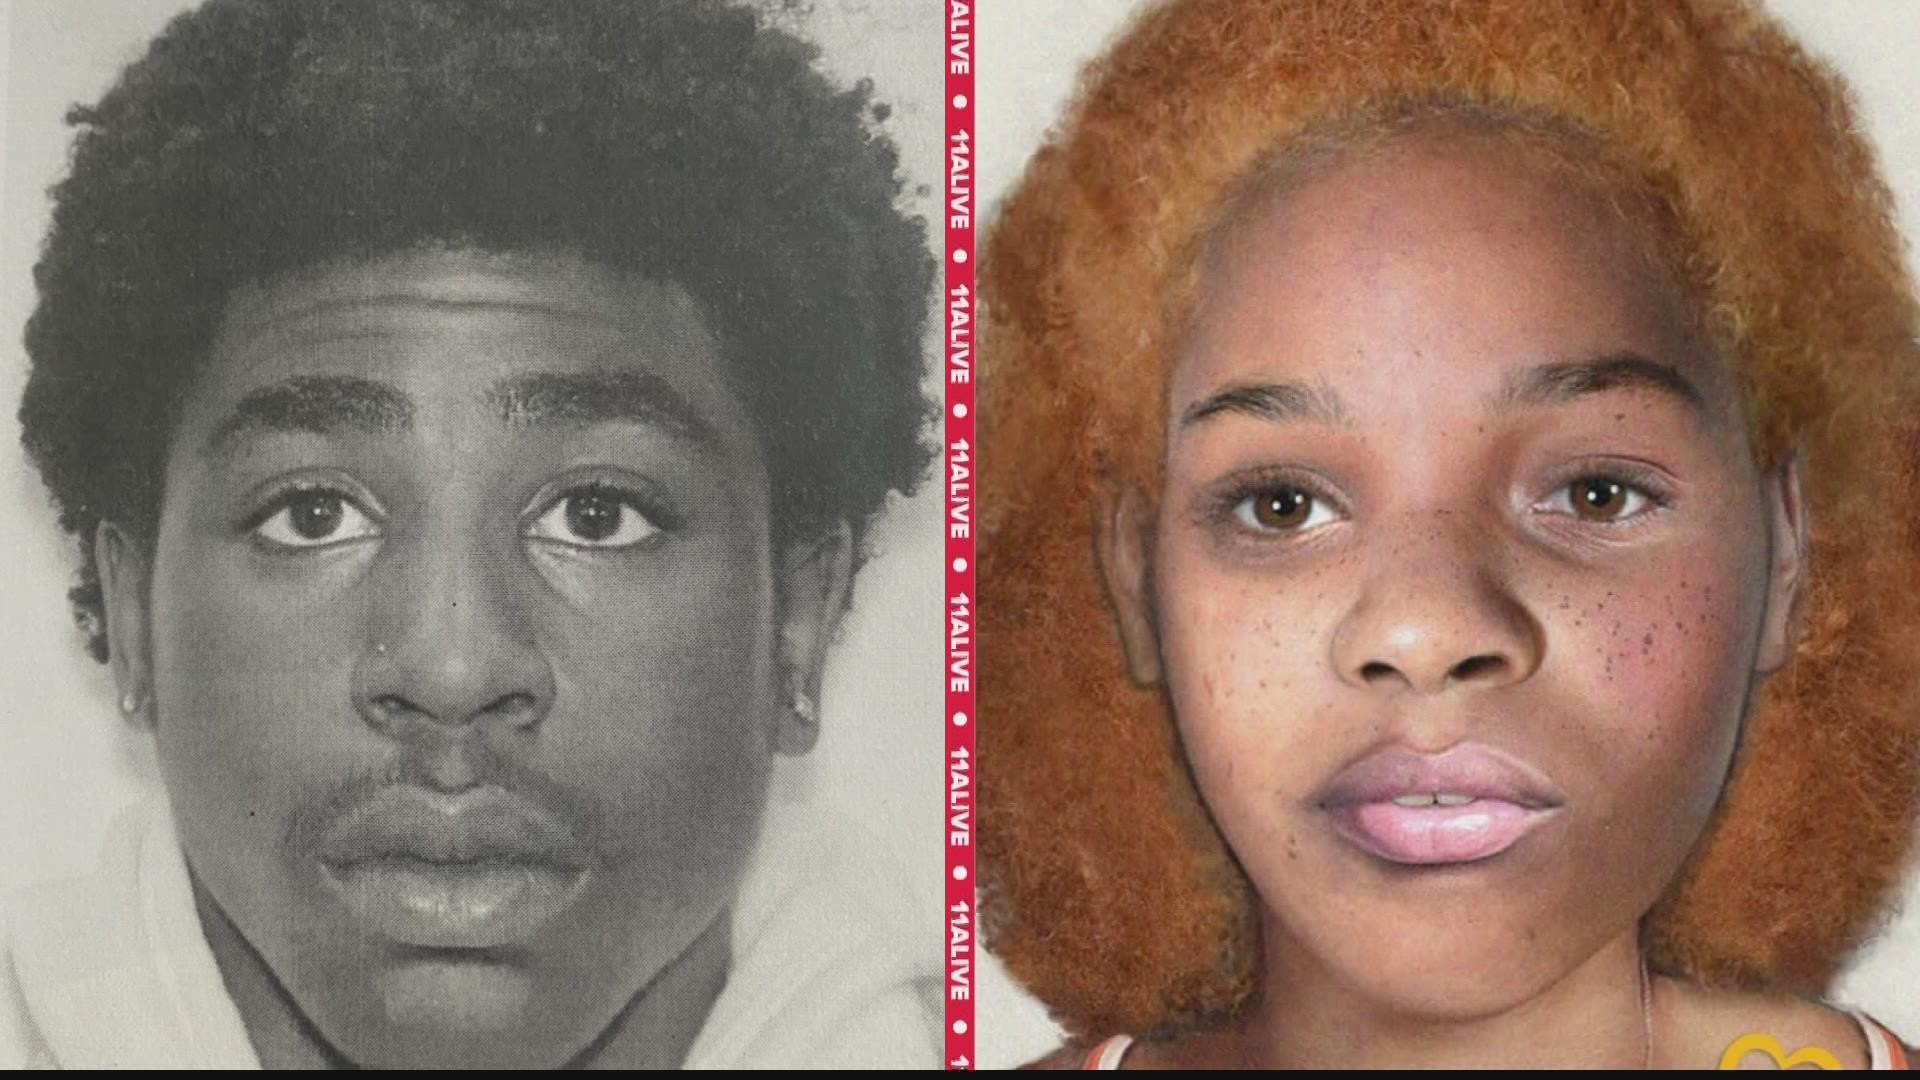 A person of interest has been identified in connection with the 16-year-old girl whose body was found beaten to death and left partially nude on the front lawn.